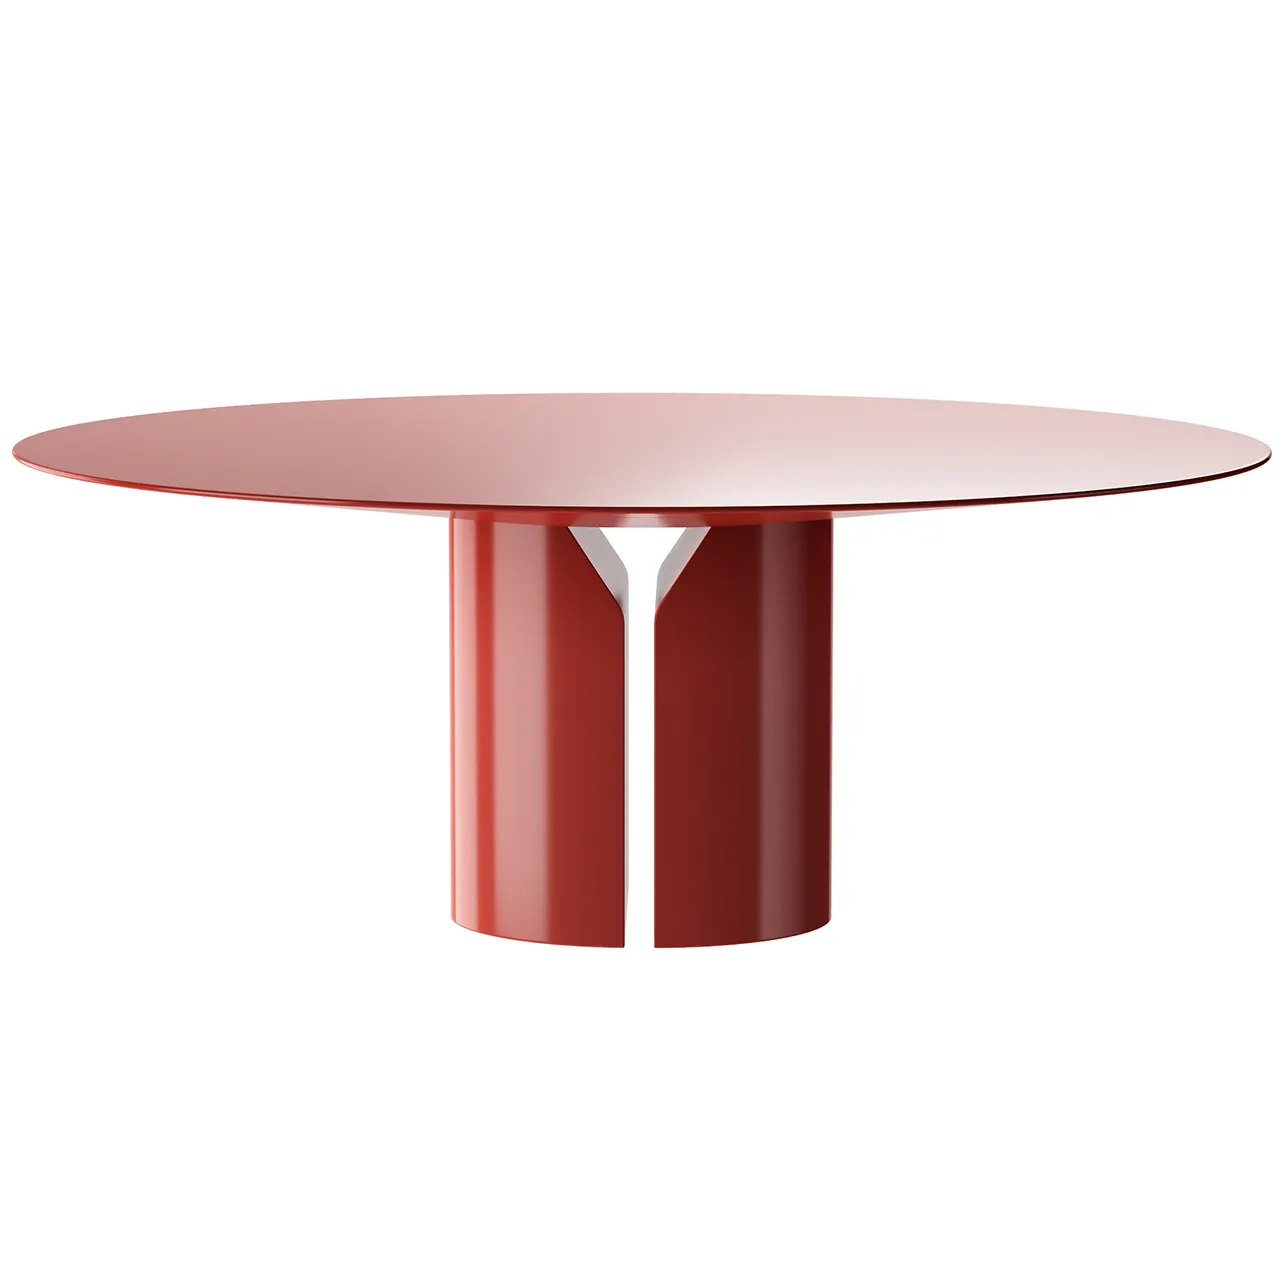 Furniture – nvl-oval-table-by-mdf-italia